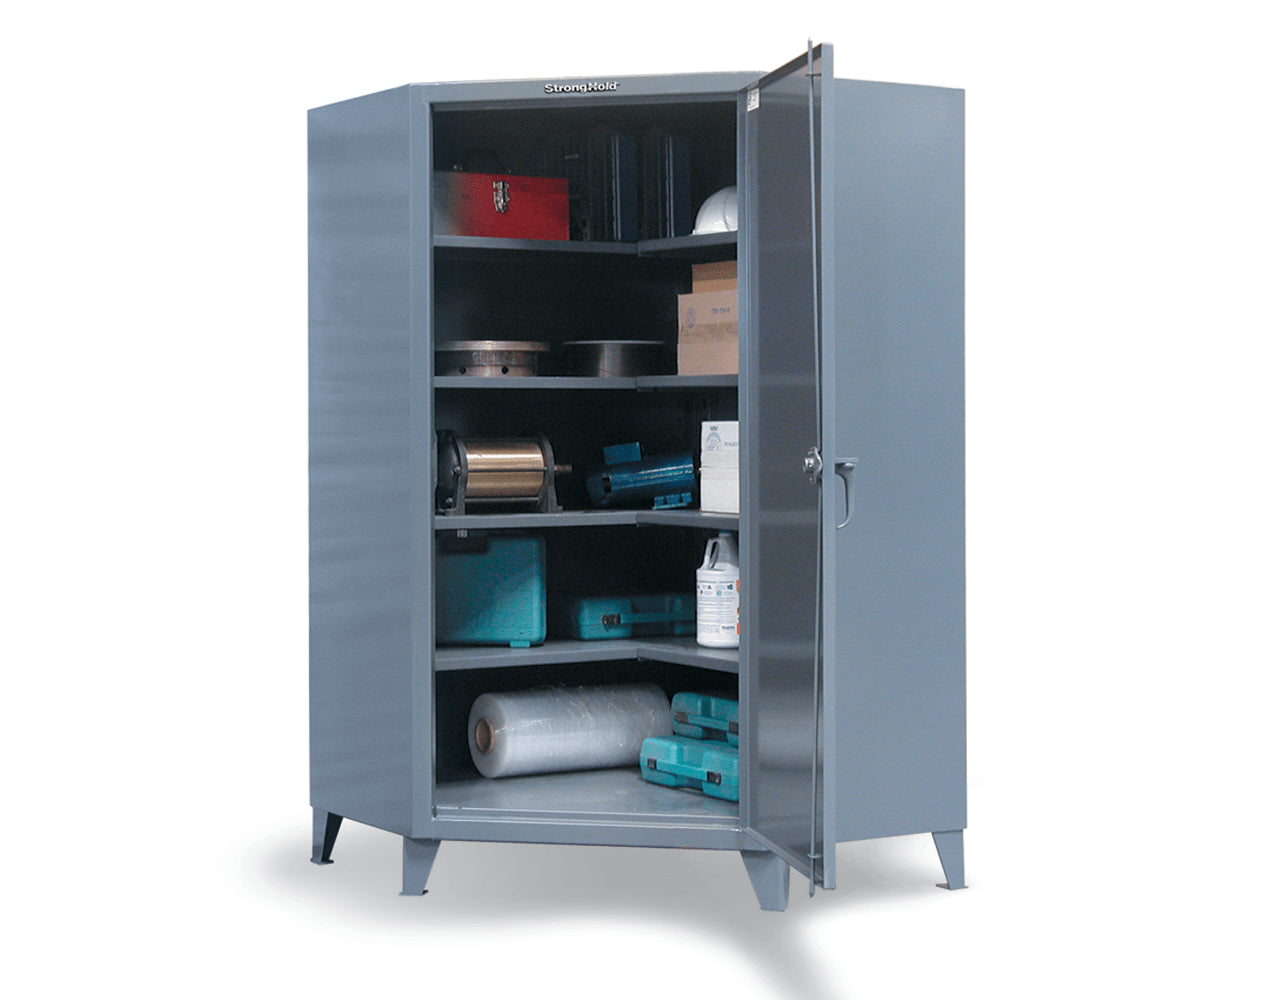 Extreme Duty 12 GA Corner Cabinet with 4 Shelves - 48 In. W x 24 In. D x 78 In. H